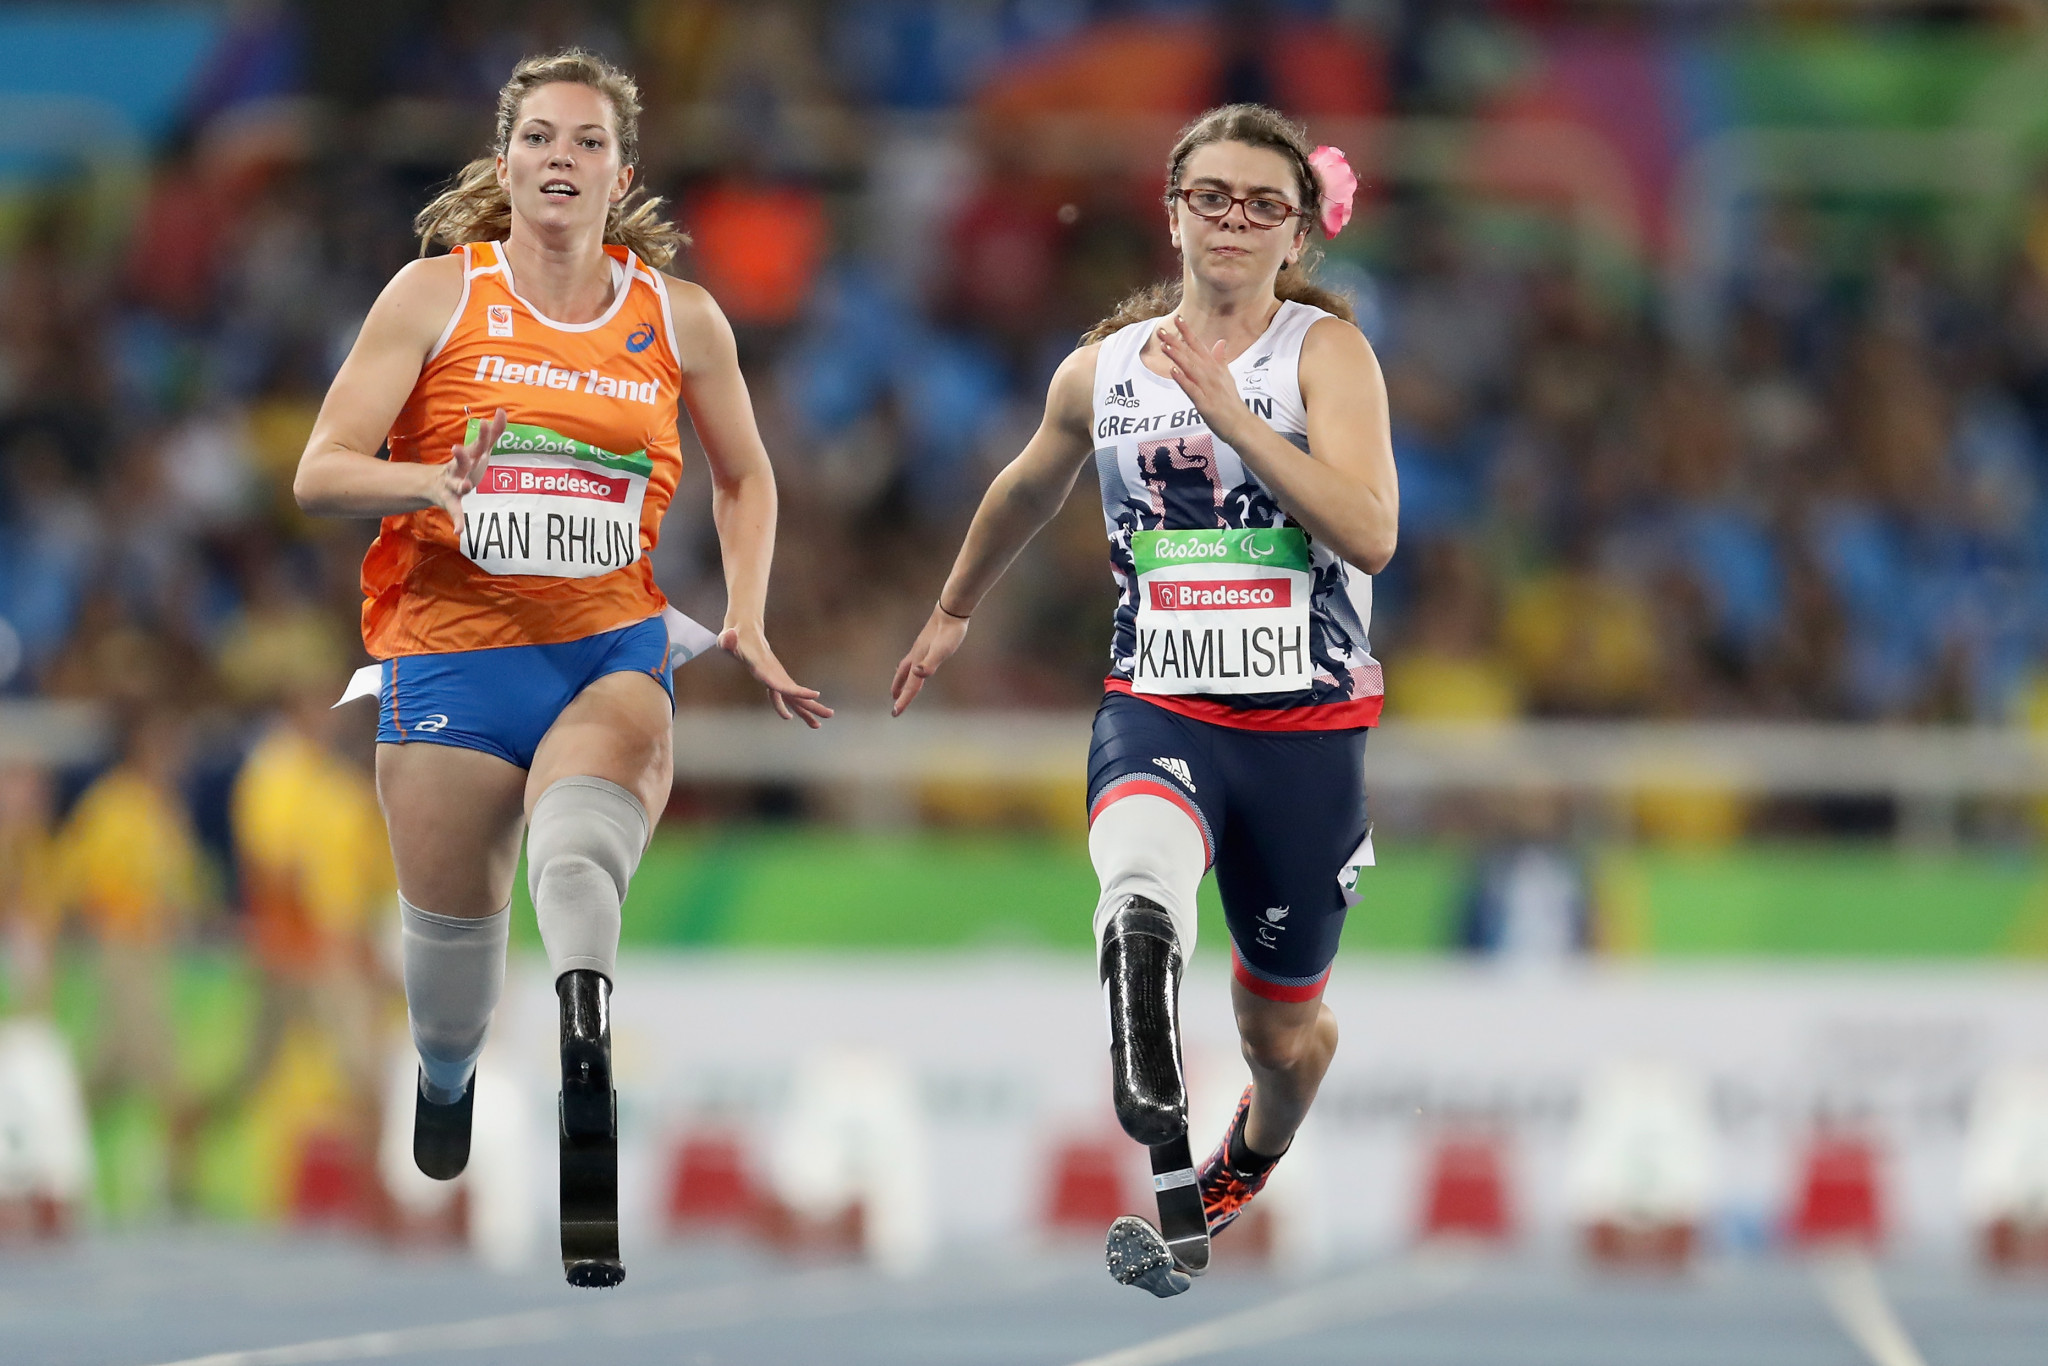 Marlou van Rhijn, of the Netherlands, left, and Sophie Kamlish, of Great Britain, seen here in the Women's 100m - T44 Final at the Rio 2016 Paralympic Games ©Getty Images